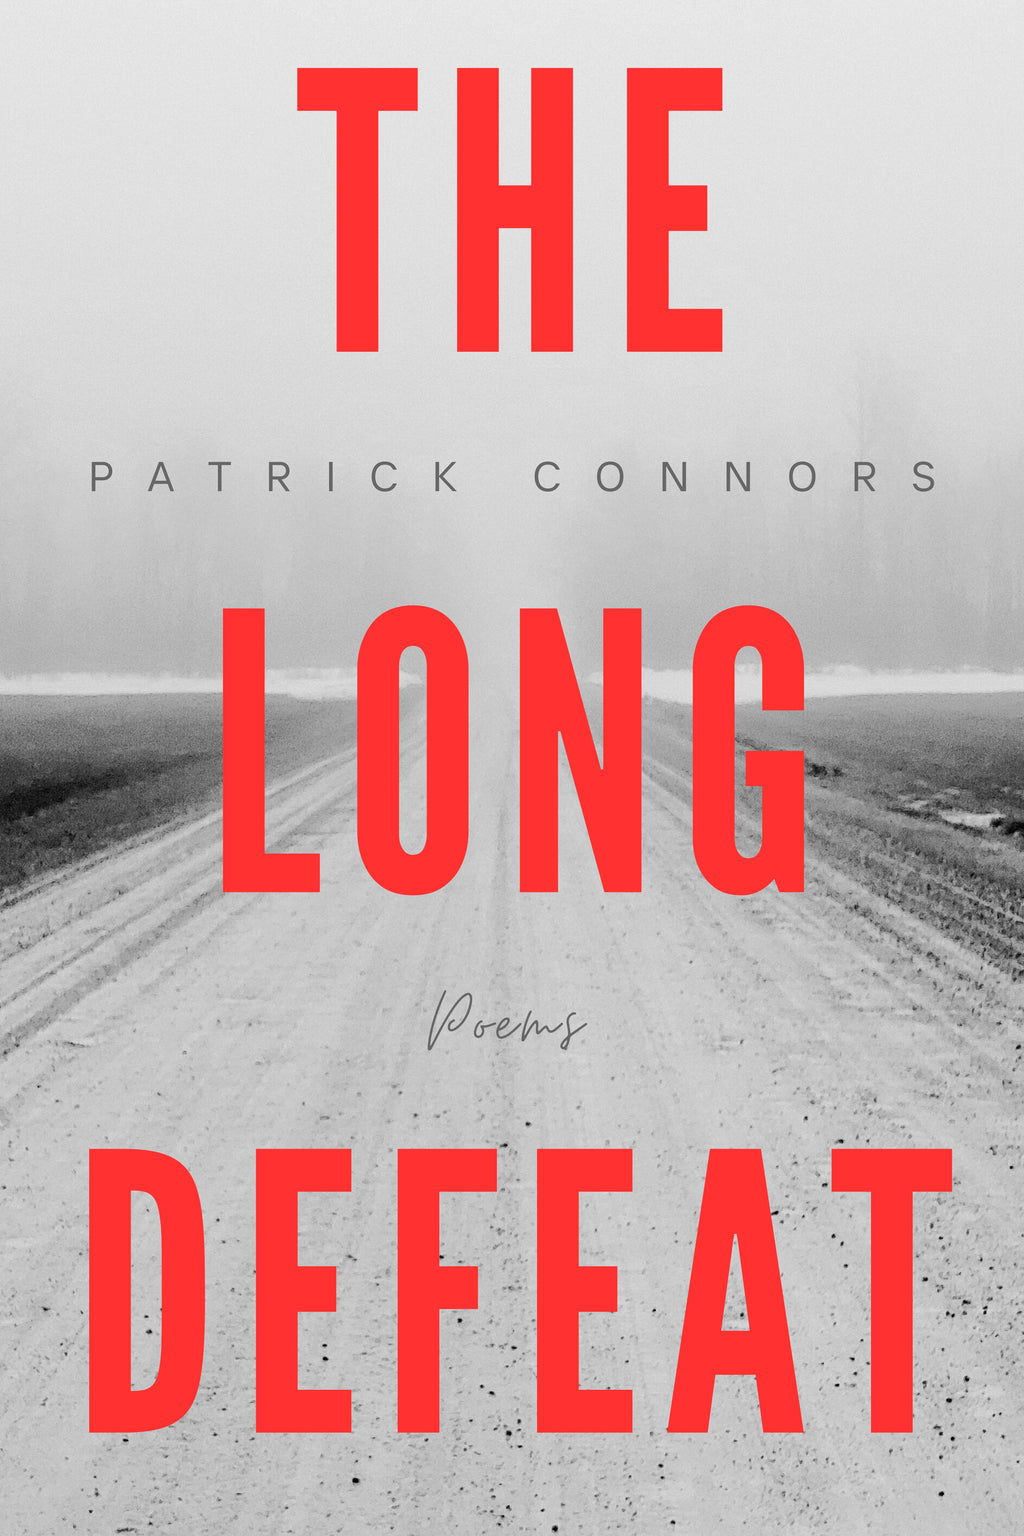 The Long Defeat